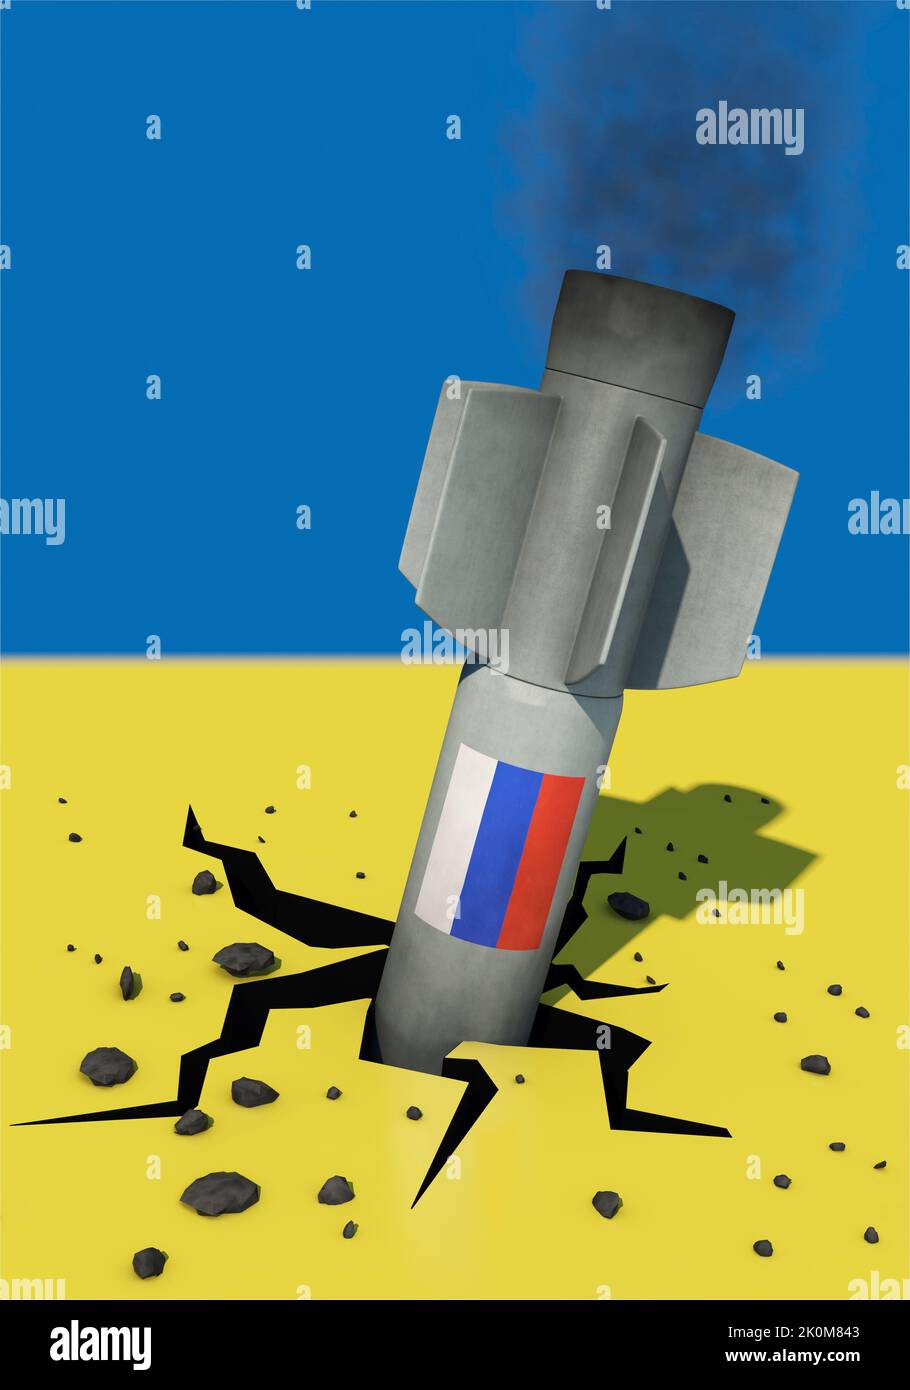 Russian missile hits Ukraine in portrait format Stock Photo